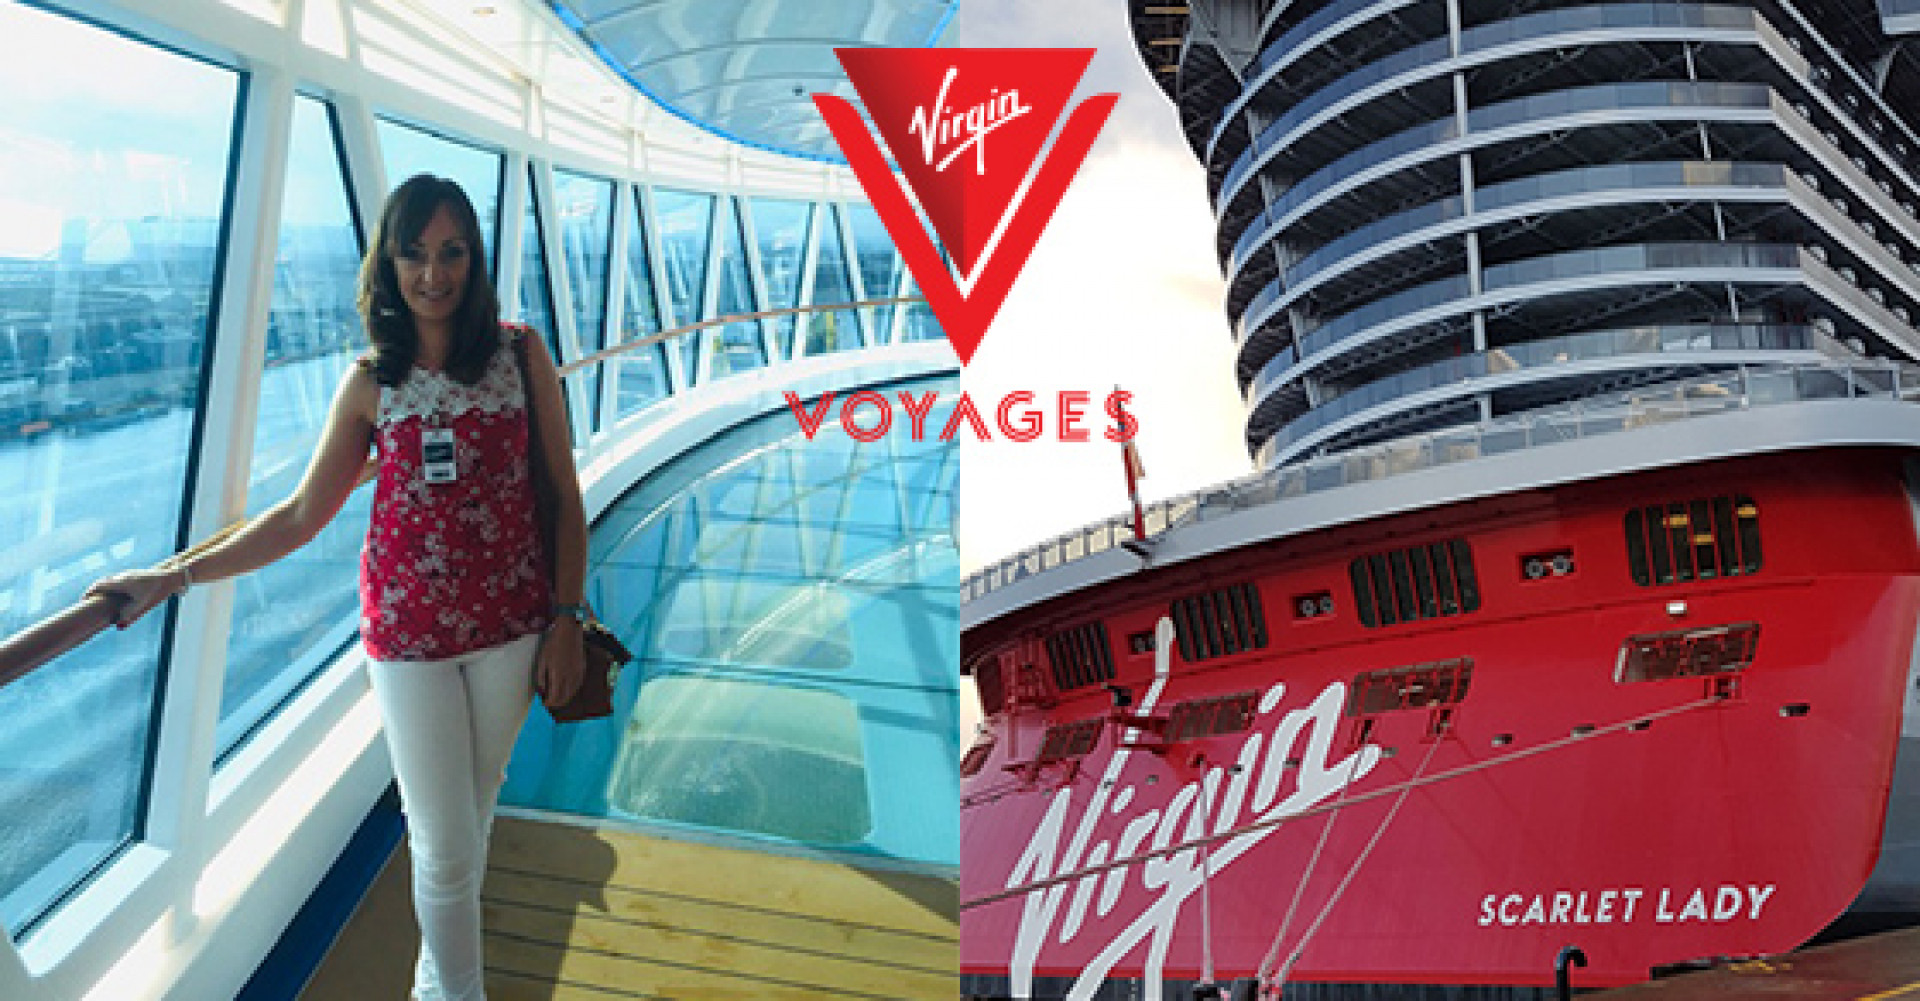 On Board the Brand New Scarlet Lady from Virgin Voyages